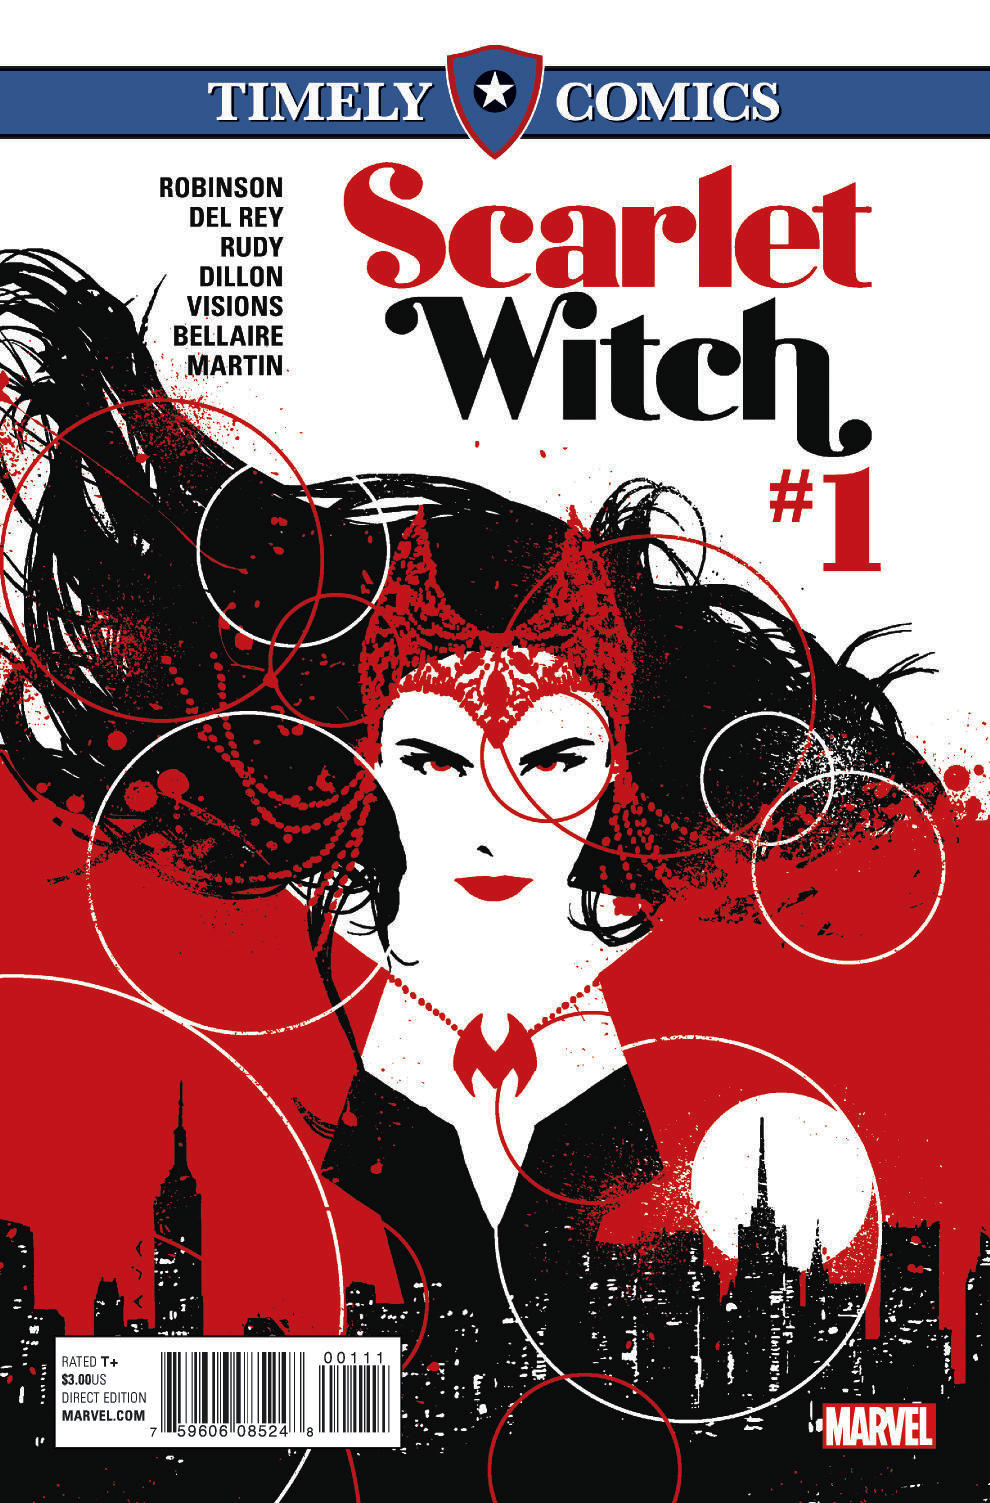 Timely Comics: Scarlet Witch (2016) #1